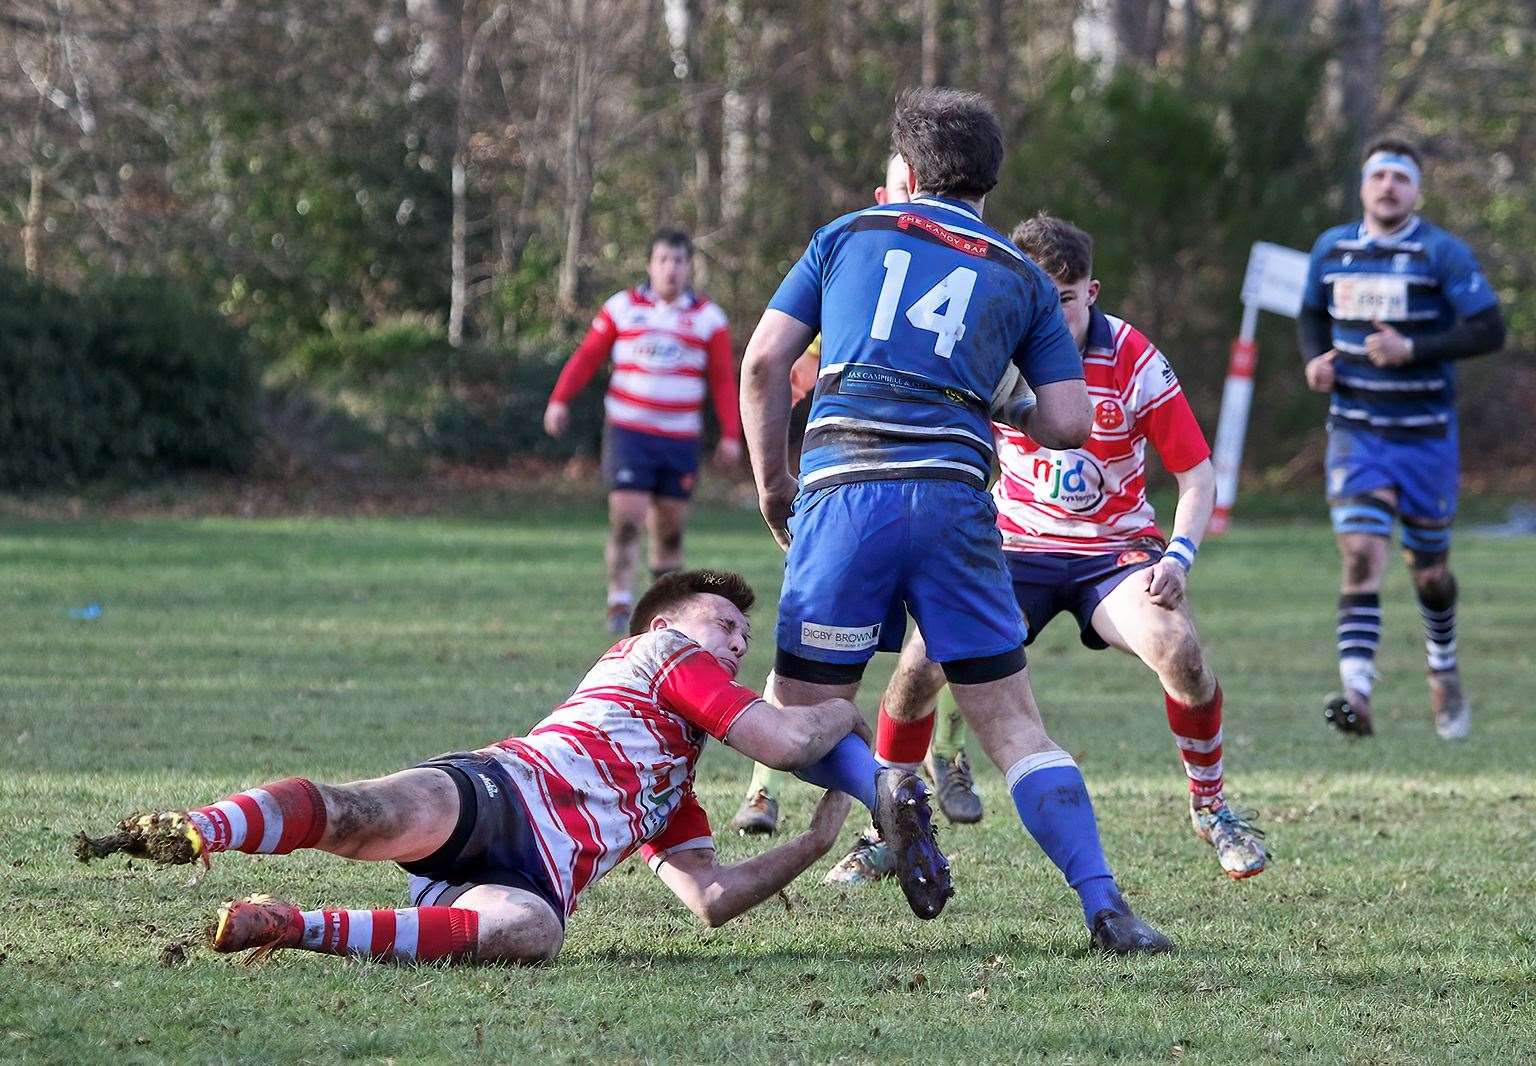 Ben Taylor tries to hold on to leg of wing. Lewis Hay lining up tackle. Picture: John MacGregor